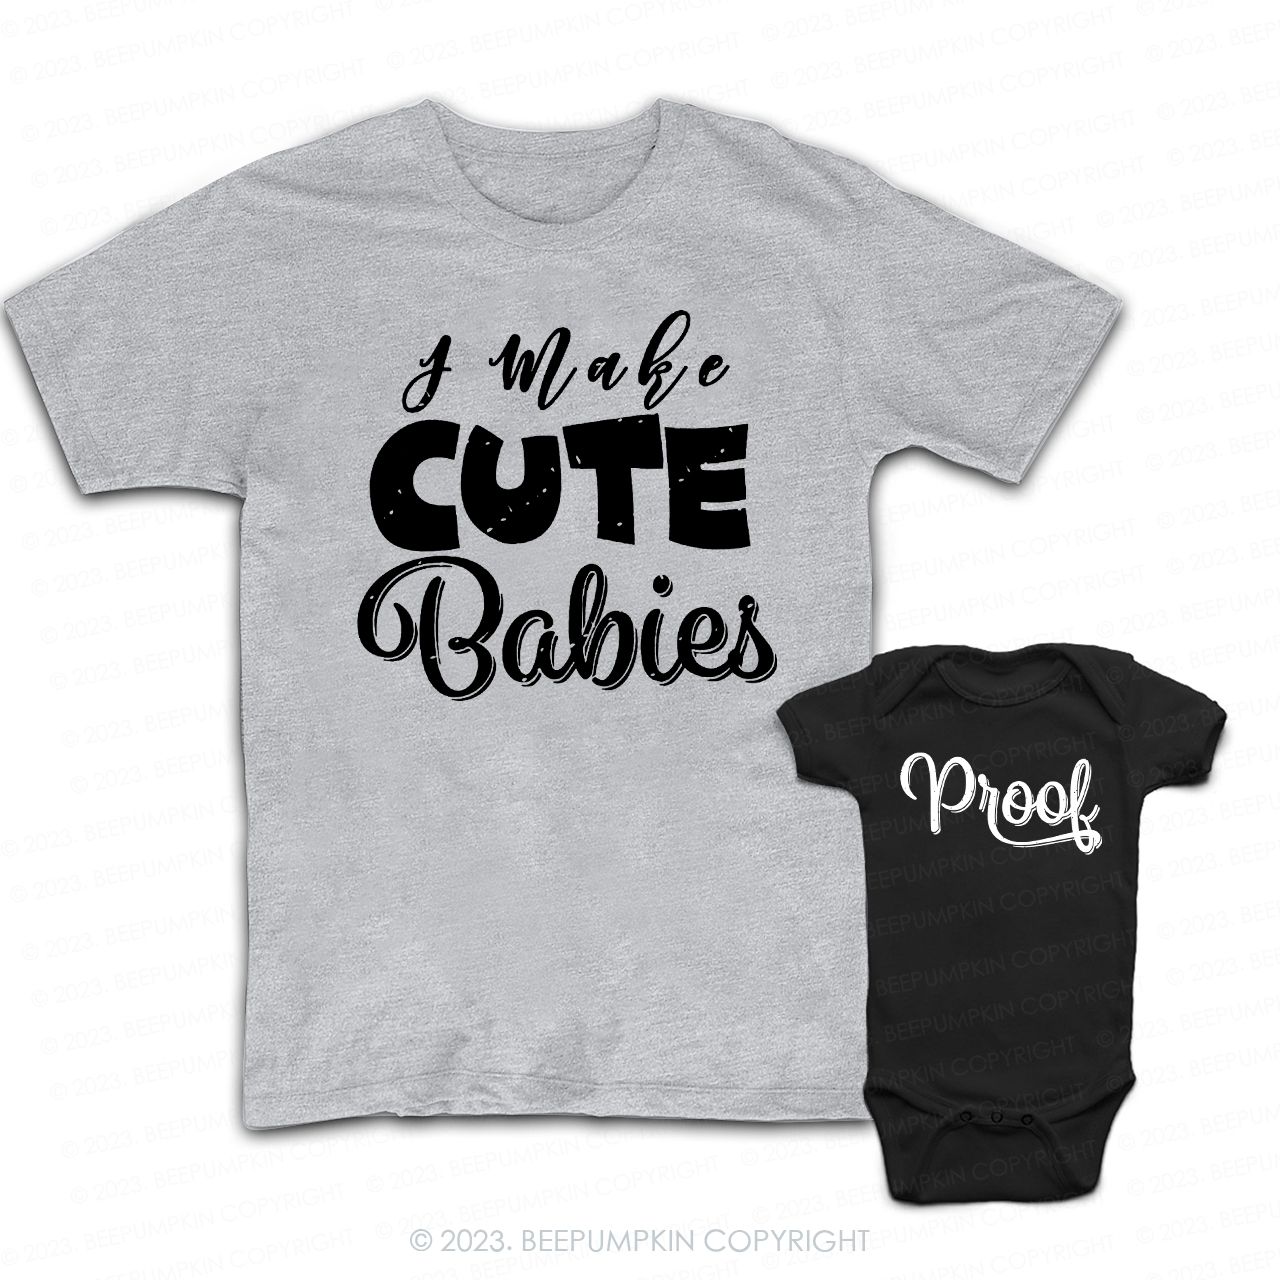 Make Awesome Cute Babies Matching T-Shirts For Dad&Me